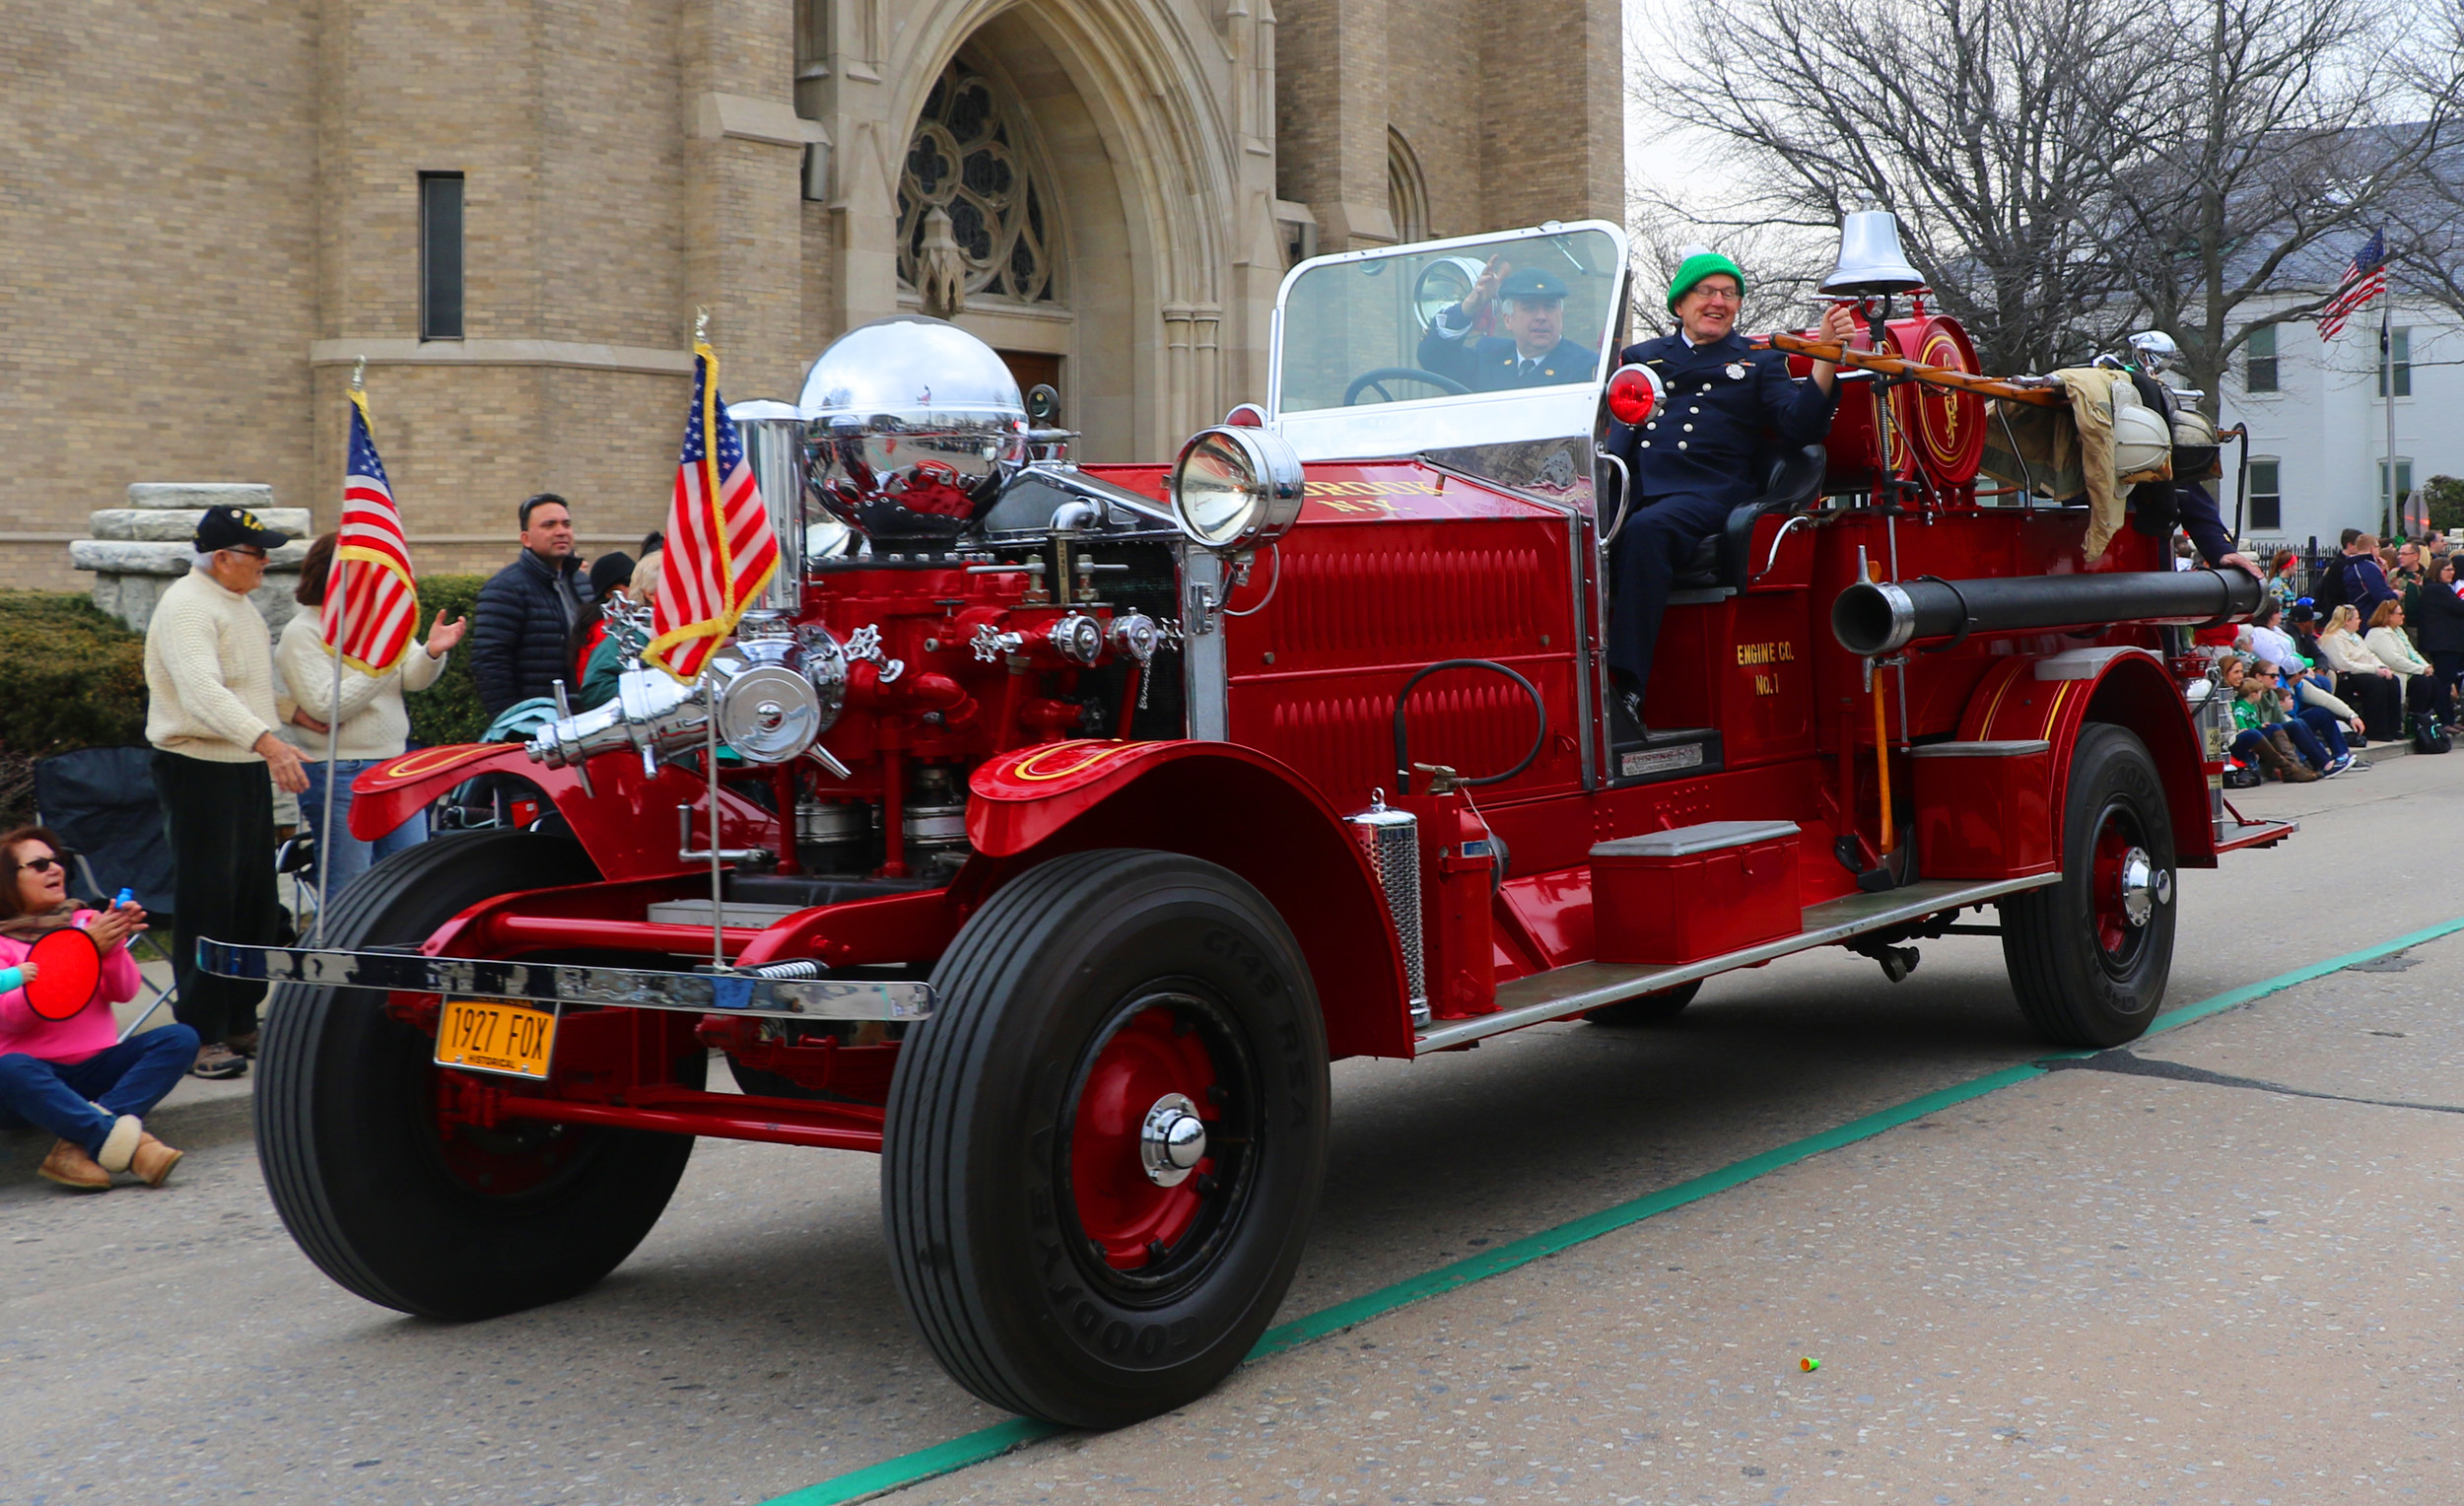 The Lynbrook fire department showed off one of its vintage 1927 Fox fire trucks.